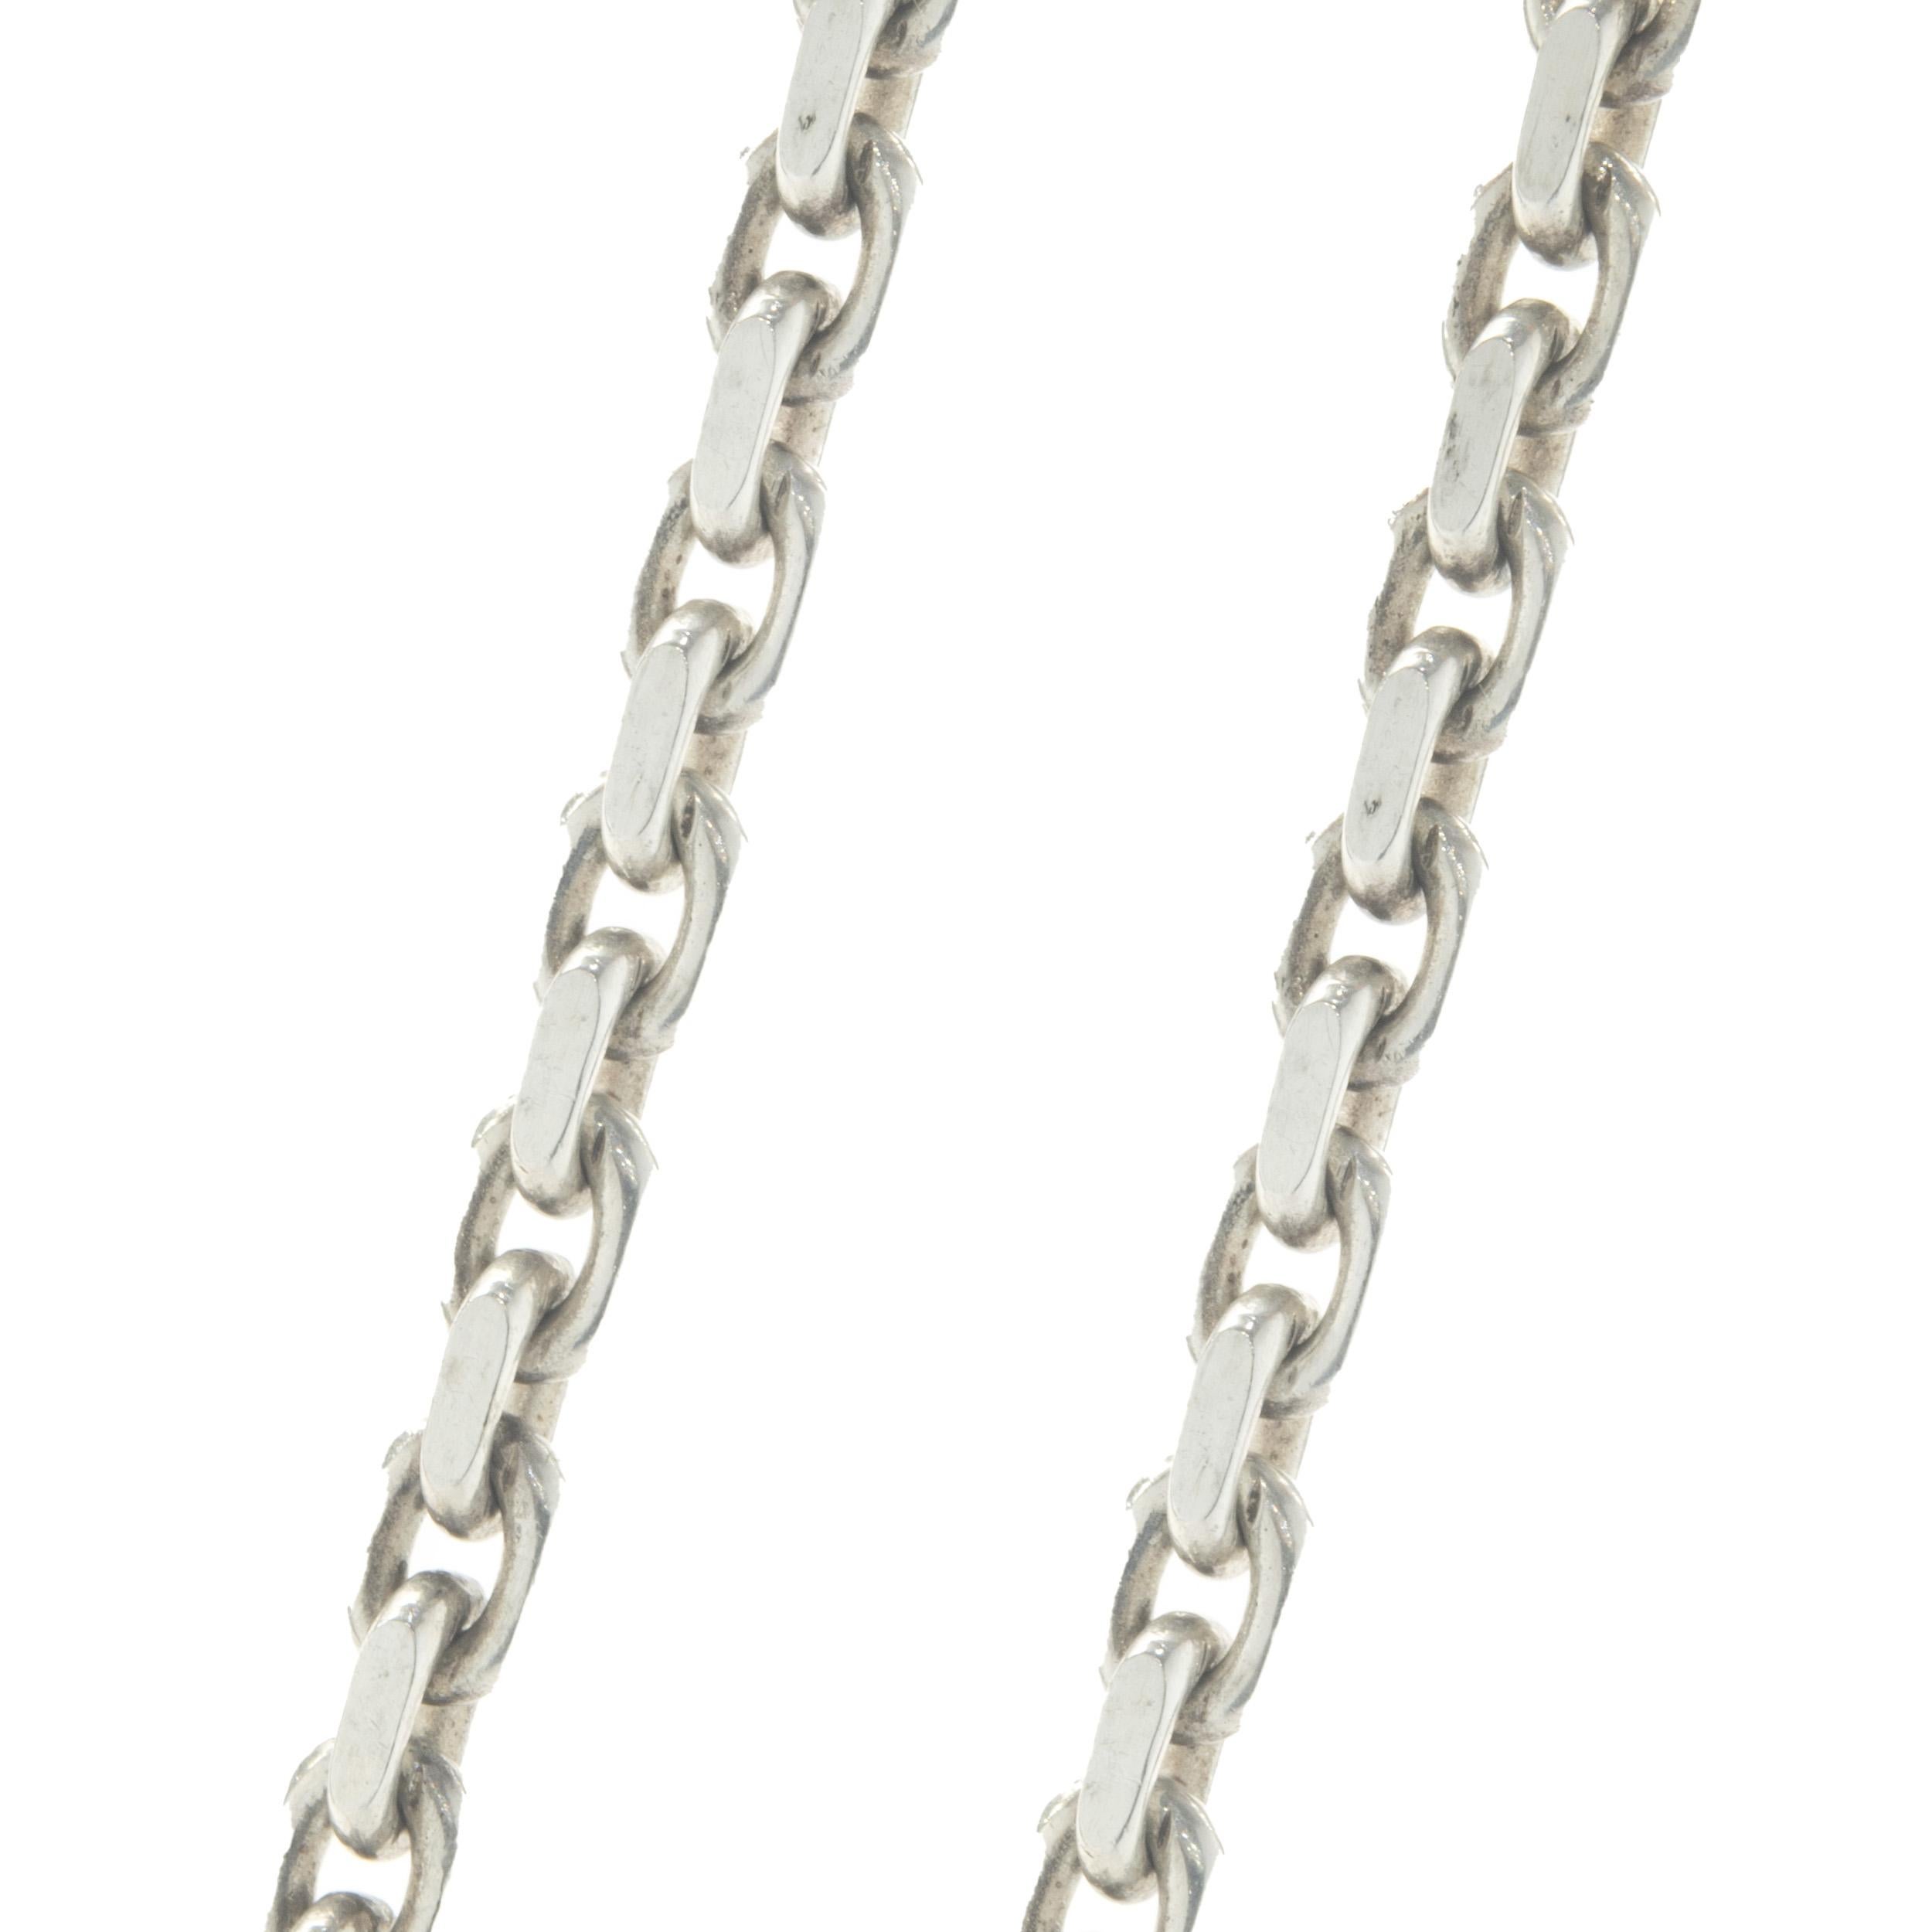 Designer: Saint
Material: Sterling silver / 14K yellow gold
Weight: 33.68 grams
Dimensions: necklace measures 25-inches